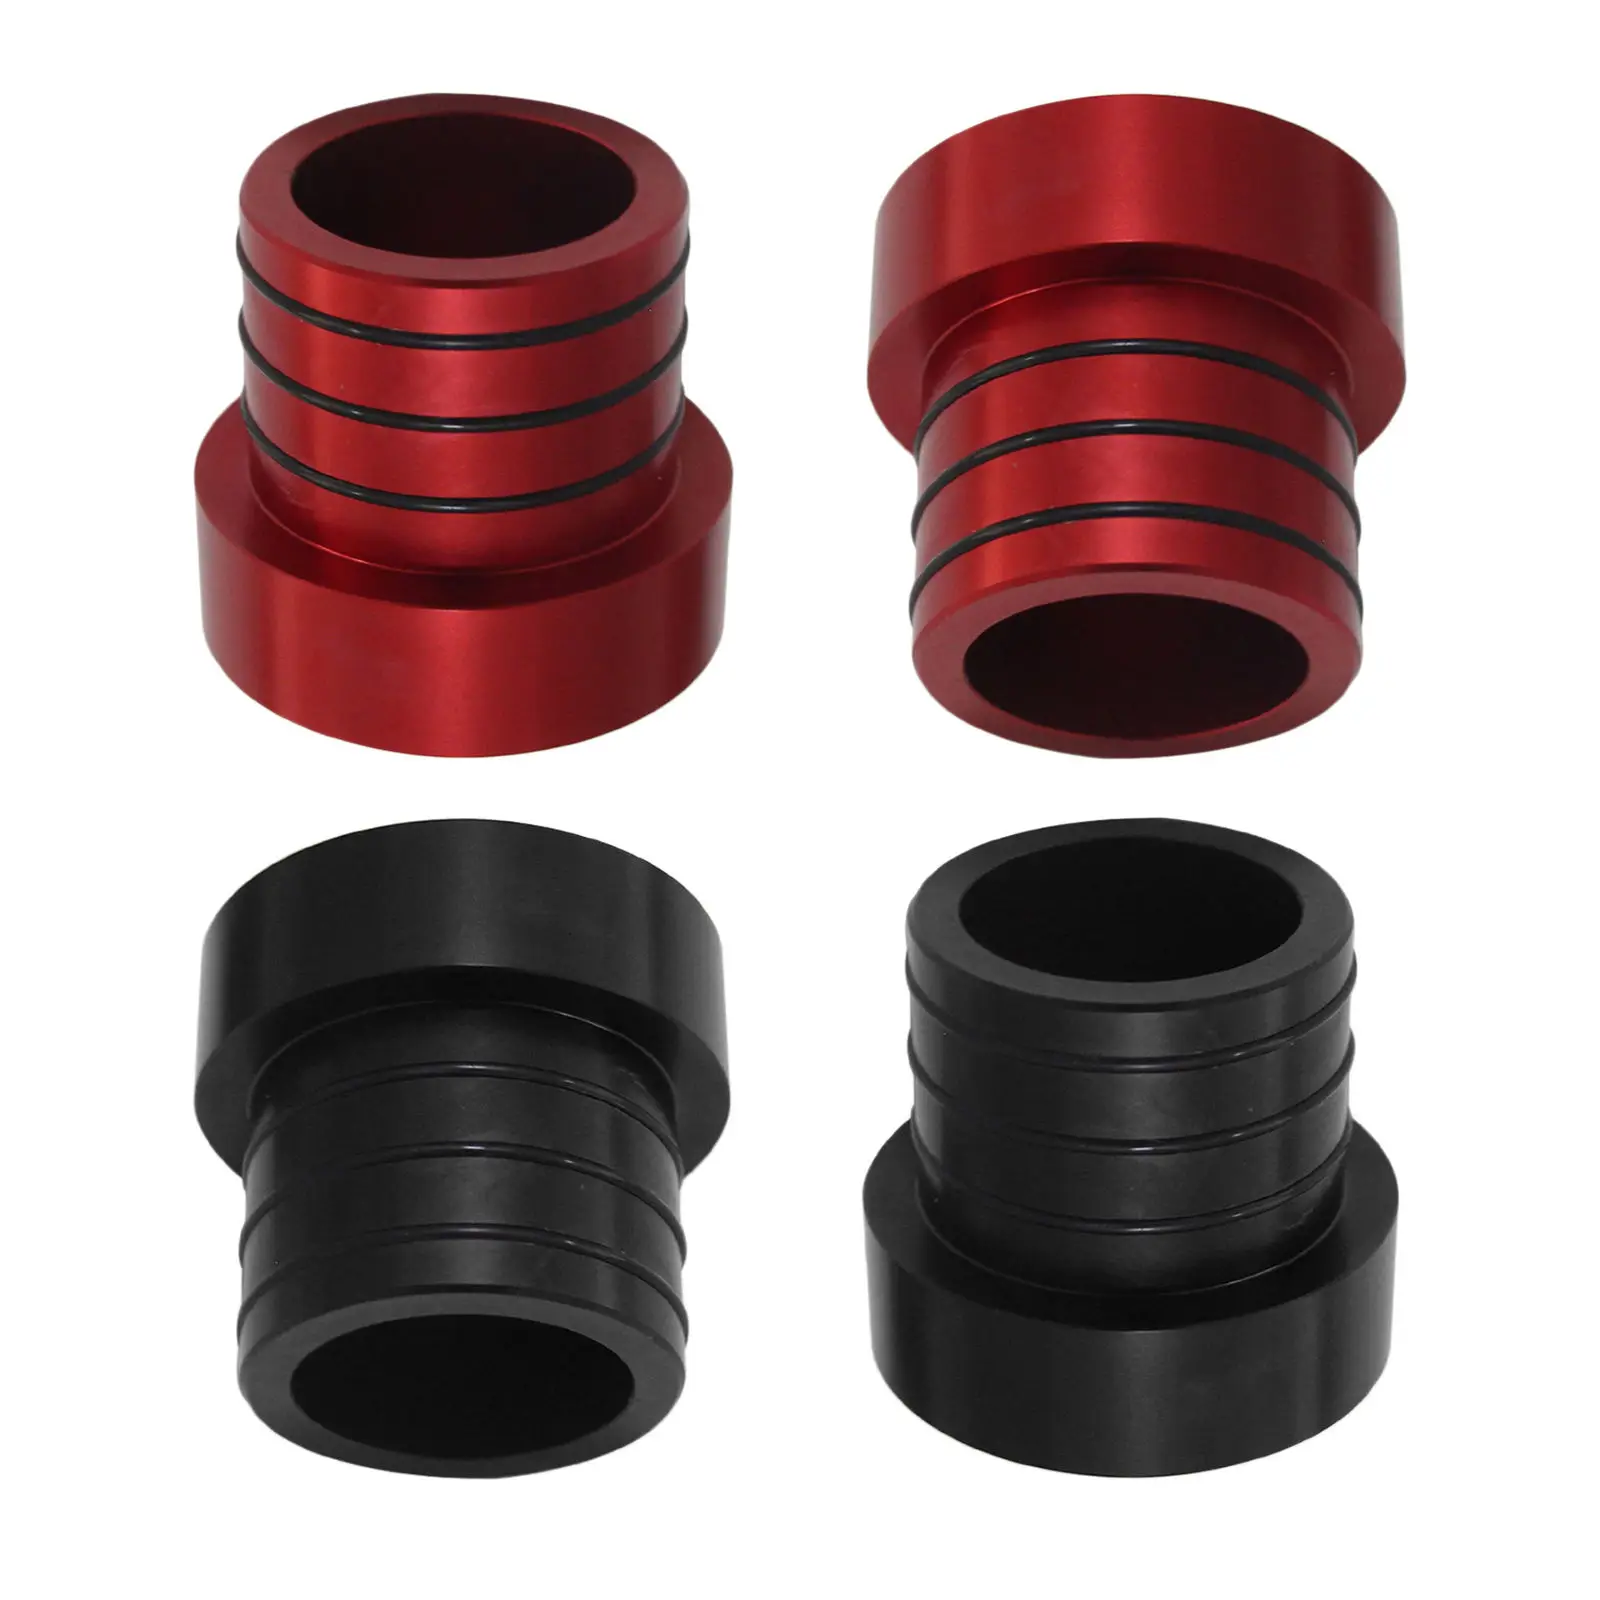 Front Left & Right Axle Tube Seals Pair Kit For 84-01 Jeep Cherokee XJ / 87-18 (Except 96) Jeep Wrangler YJ TJ LJ JK red/black